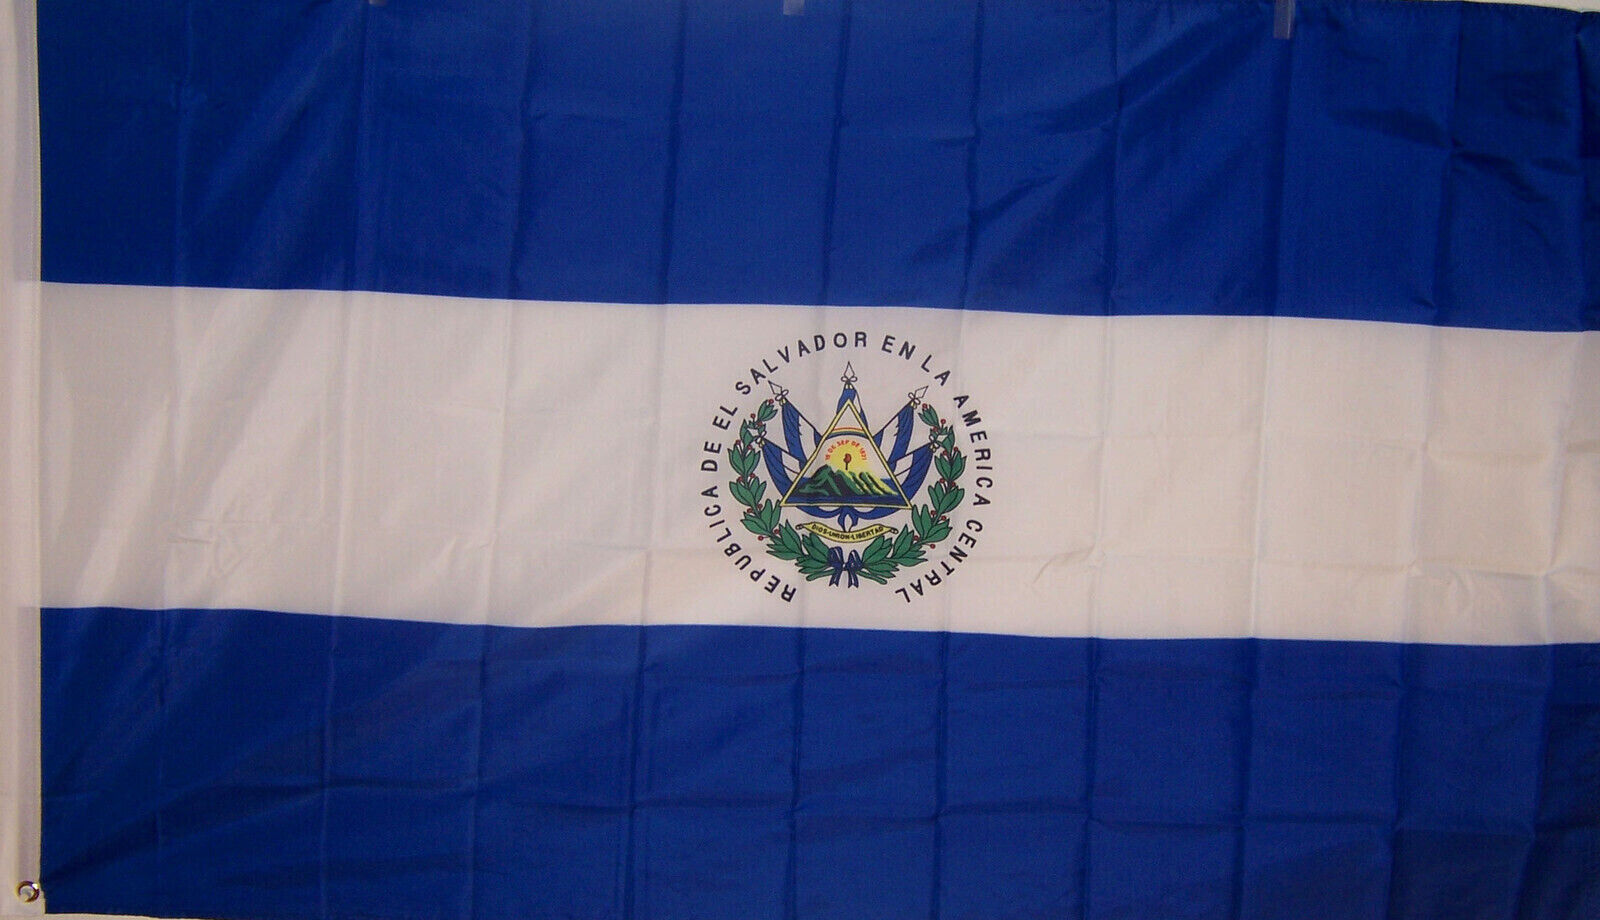 NEW 3ftx5 EL SALVADOR FLAG COUNTRY BANNER FLAGS